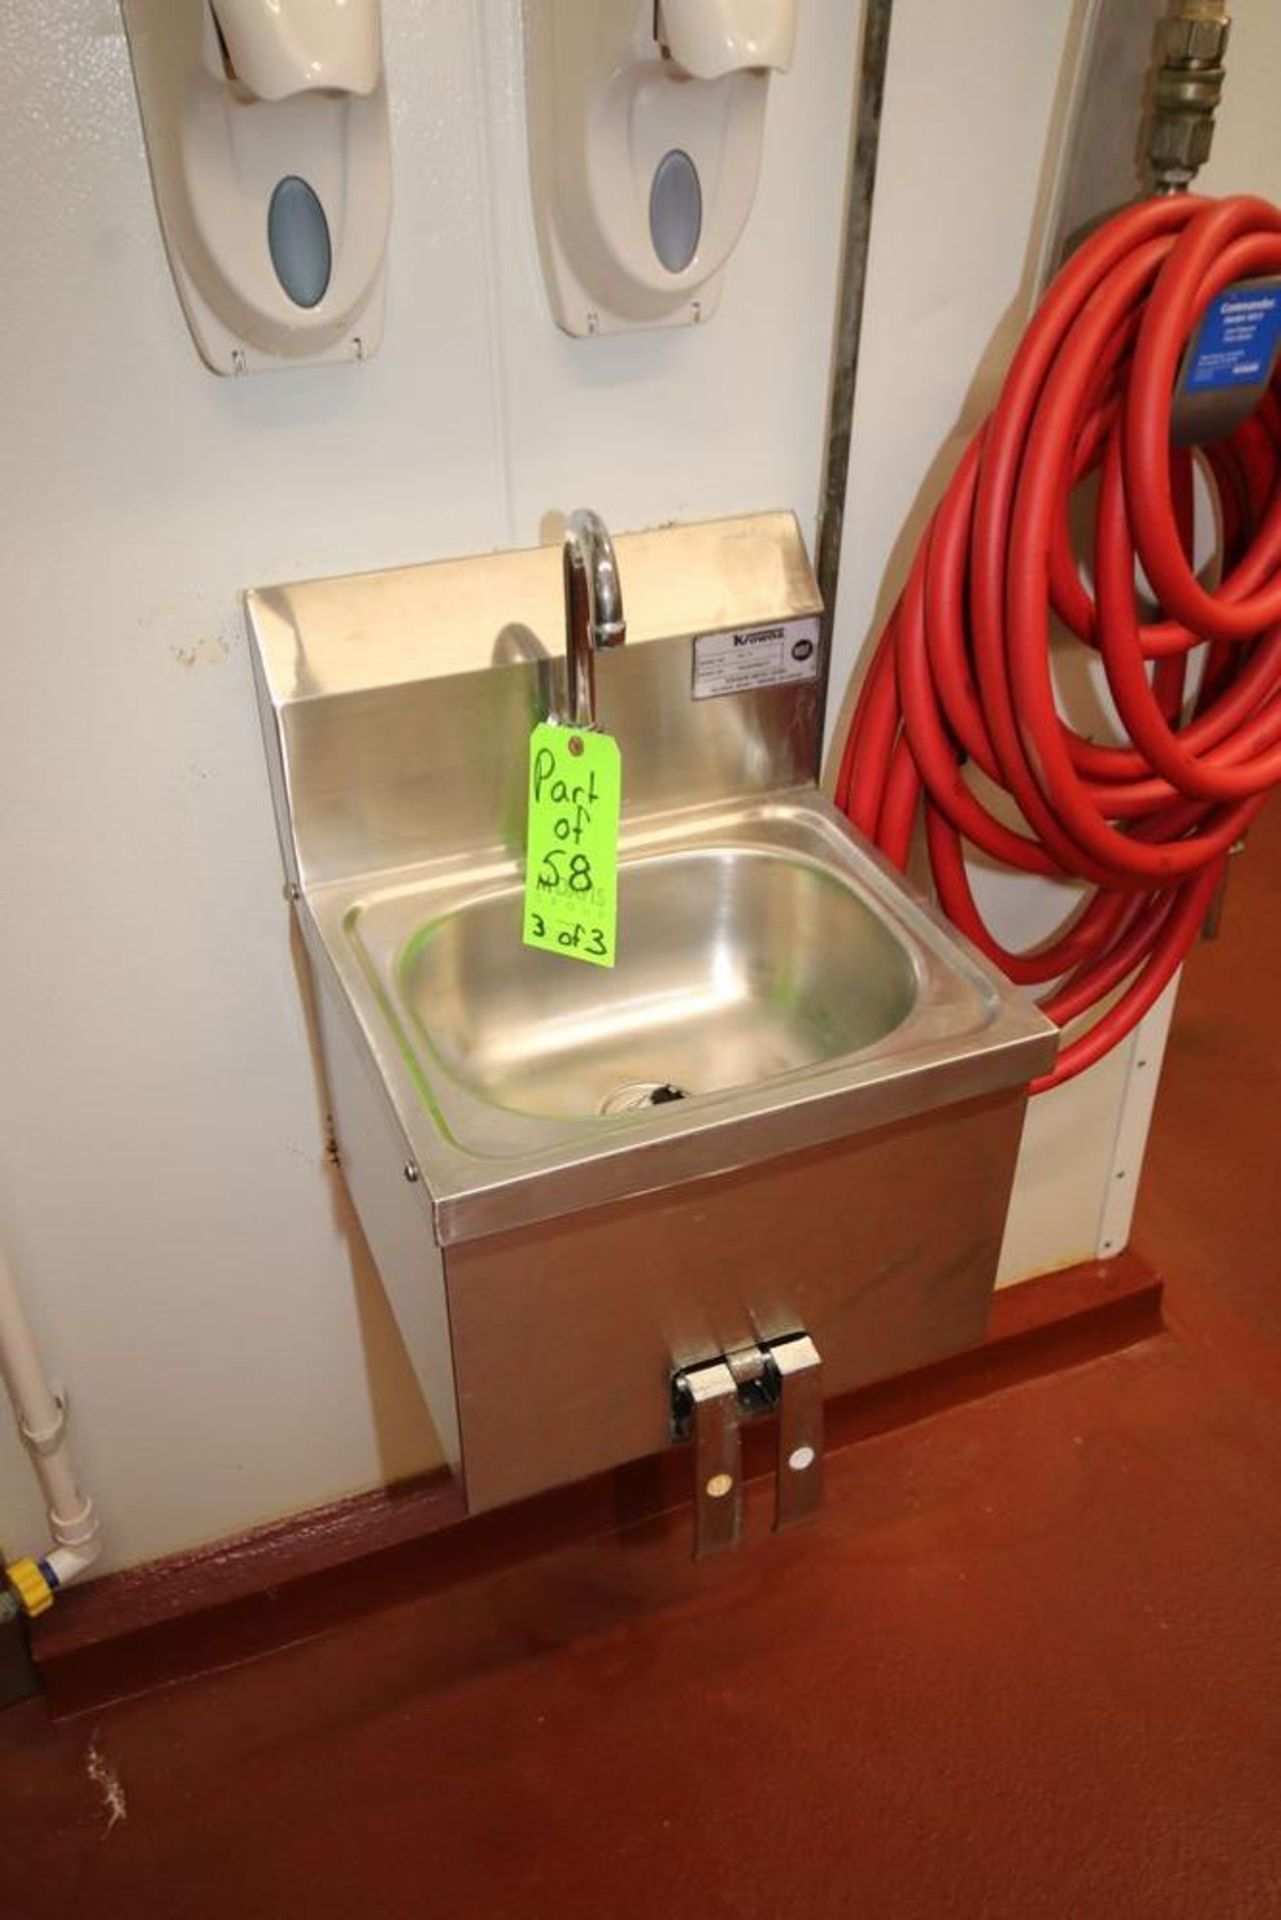 Krowne S/S Single Bowl Sink, M/N HS-15, with Knee Controls (LOCATED IN GLOUCESTER, MA) (Rigging,